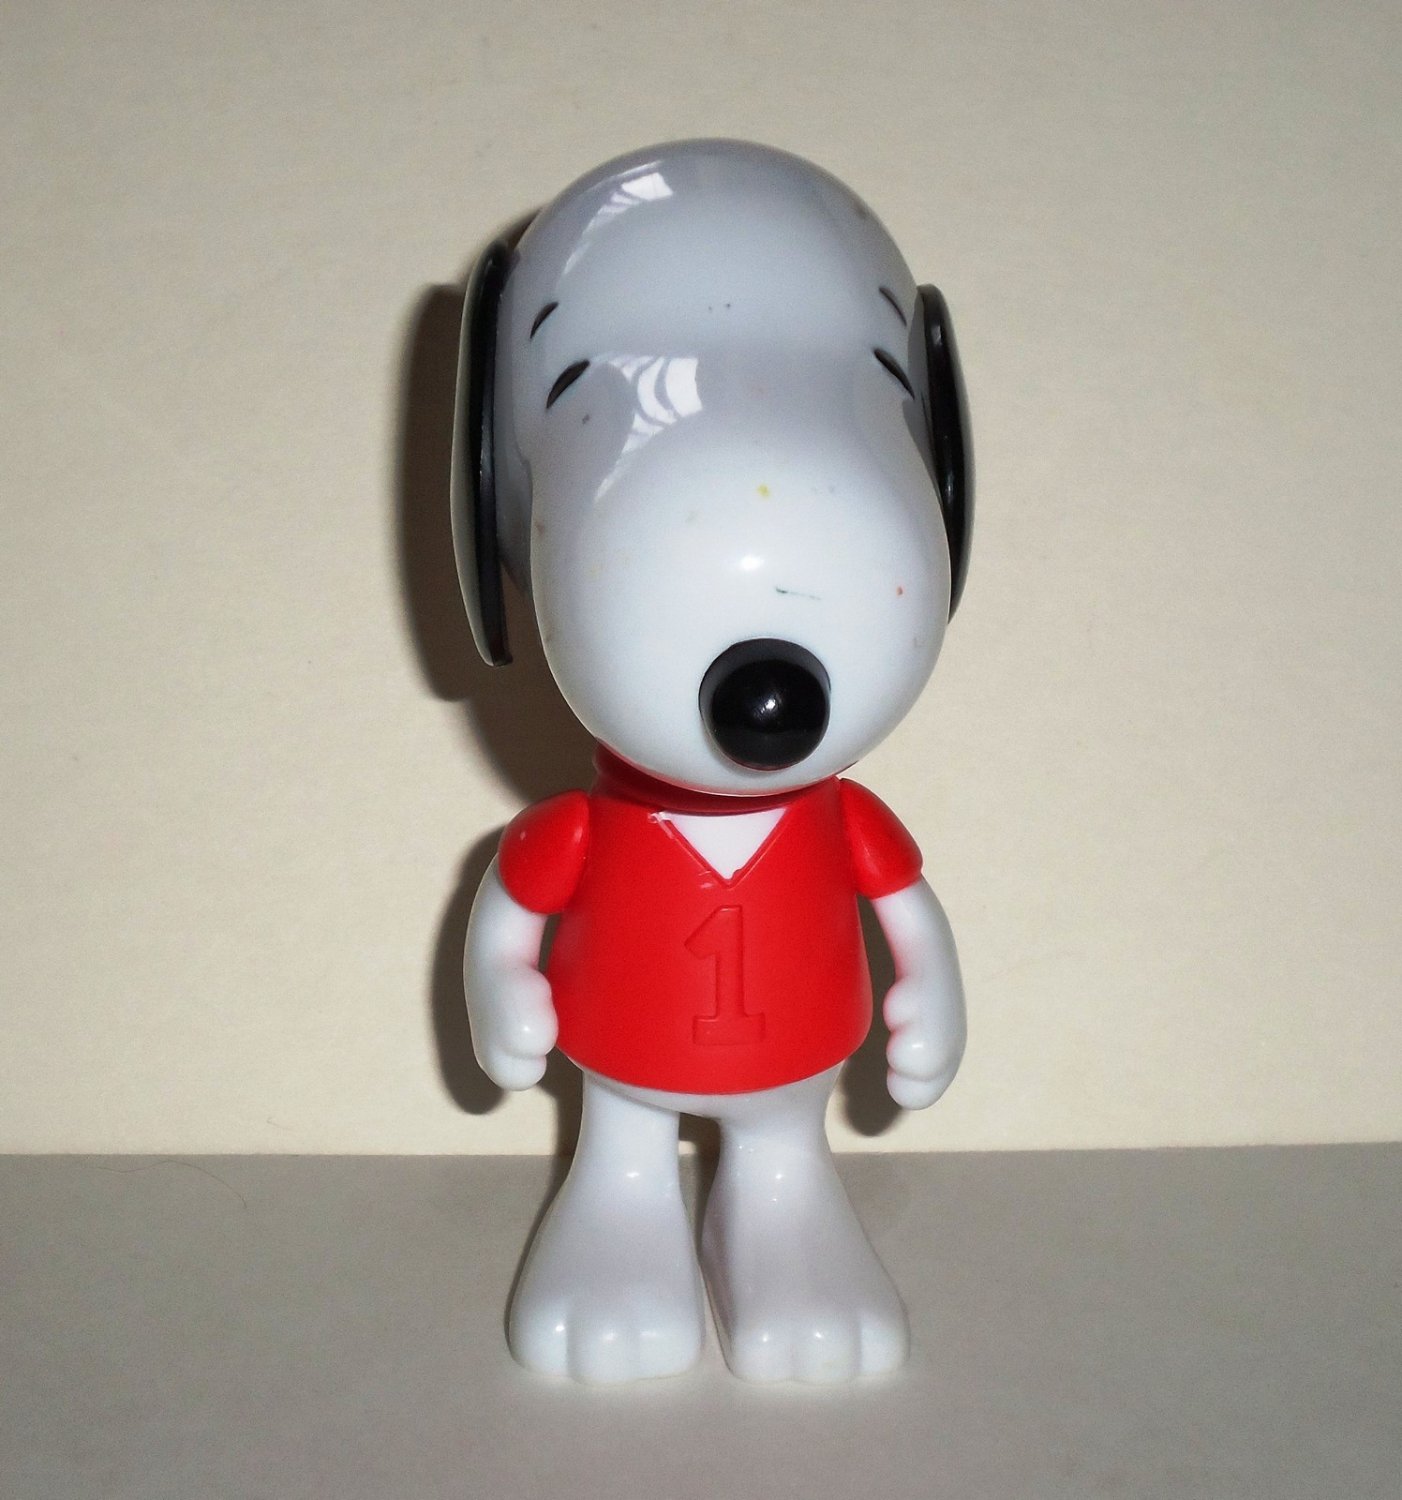 Burger King 2007 Snoopy Soccer Snoopy Kids' Meal Toy Figure Only Peanuts Loose Used